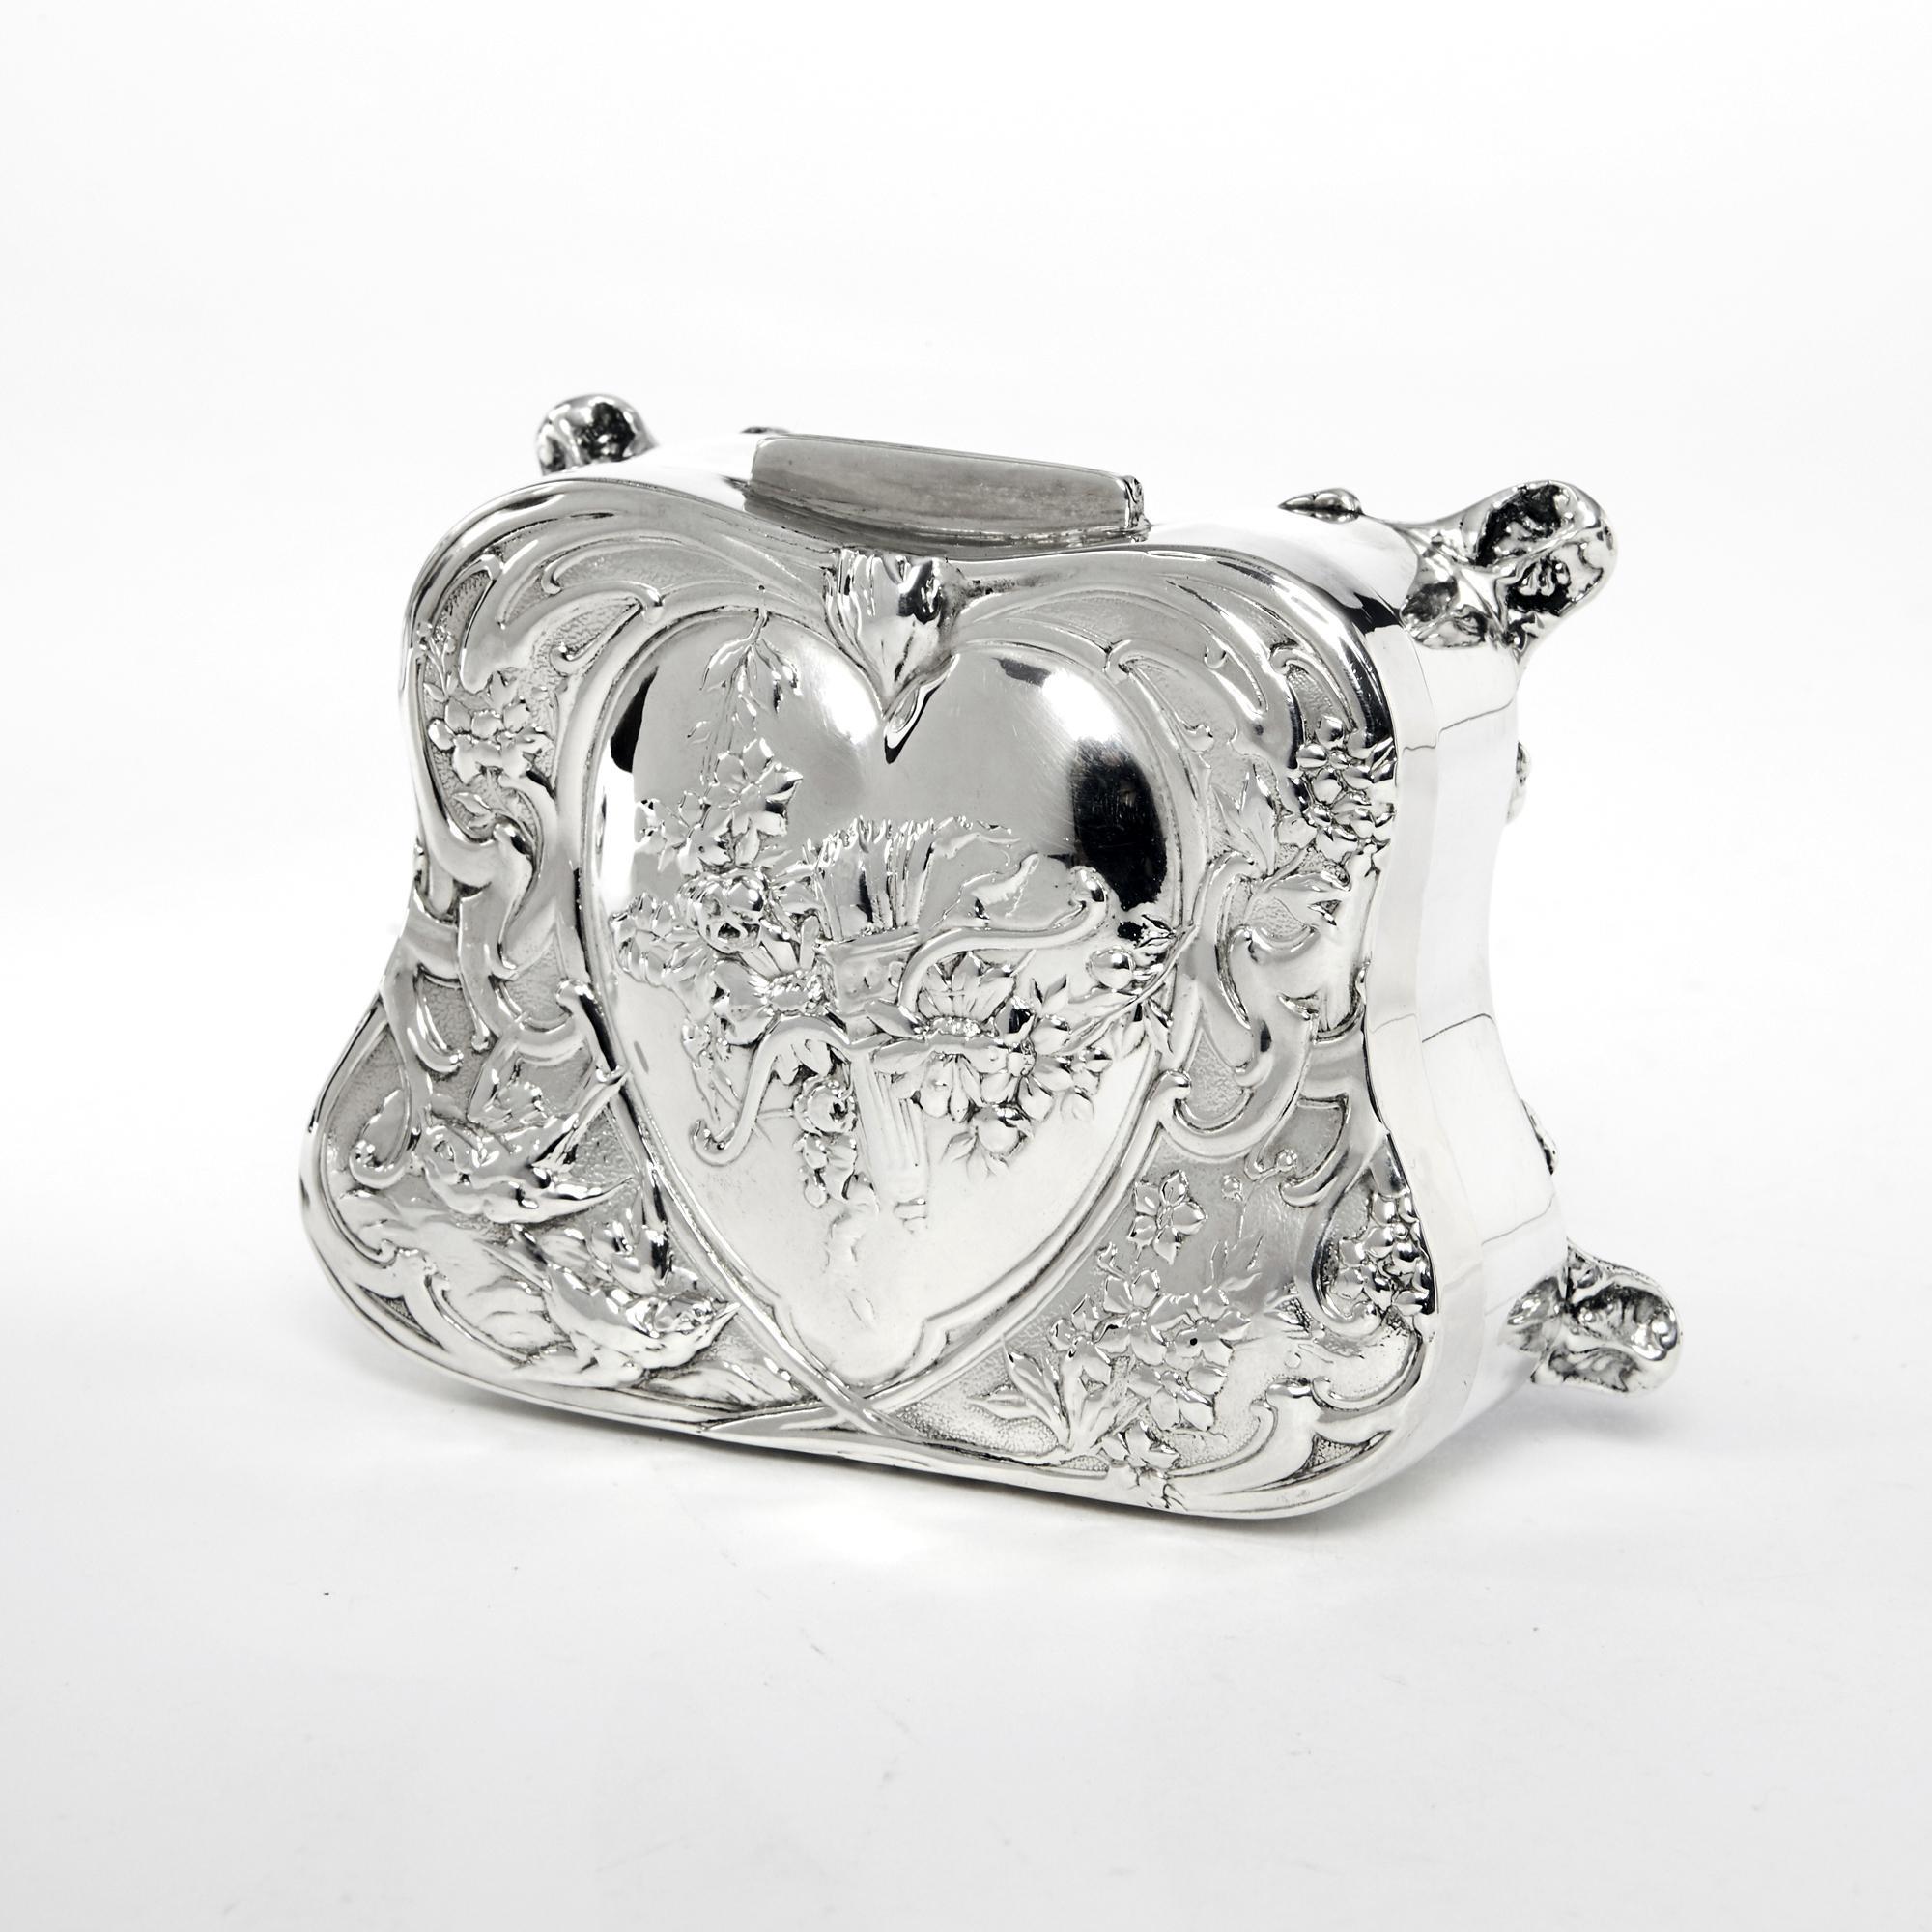 Early 20th Century Art Nouveau Silver Jewelry Box